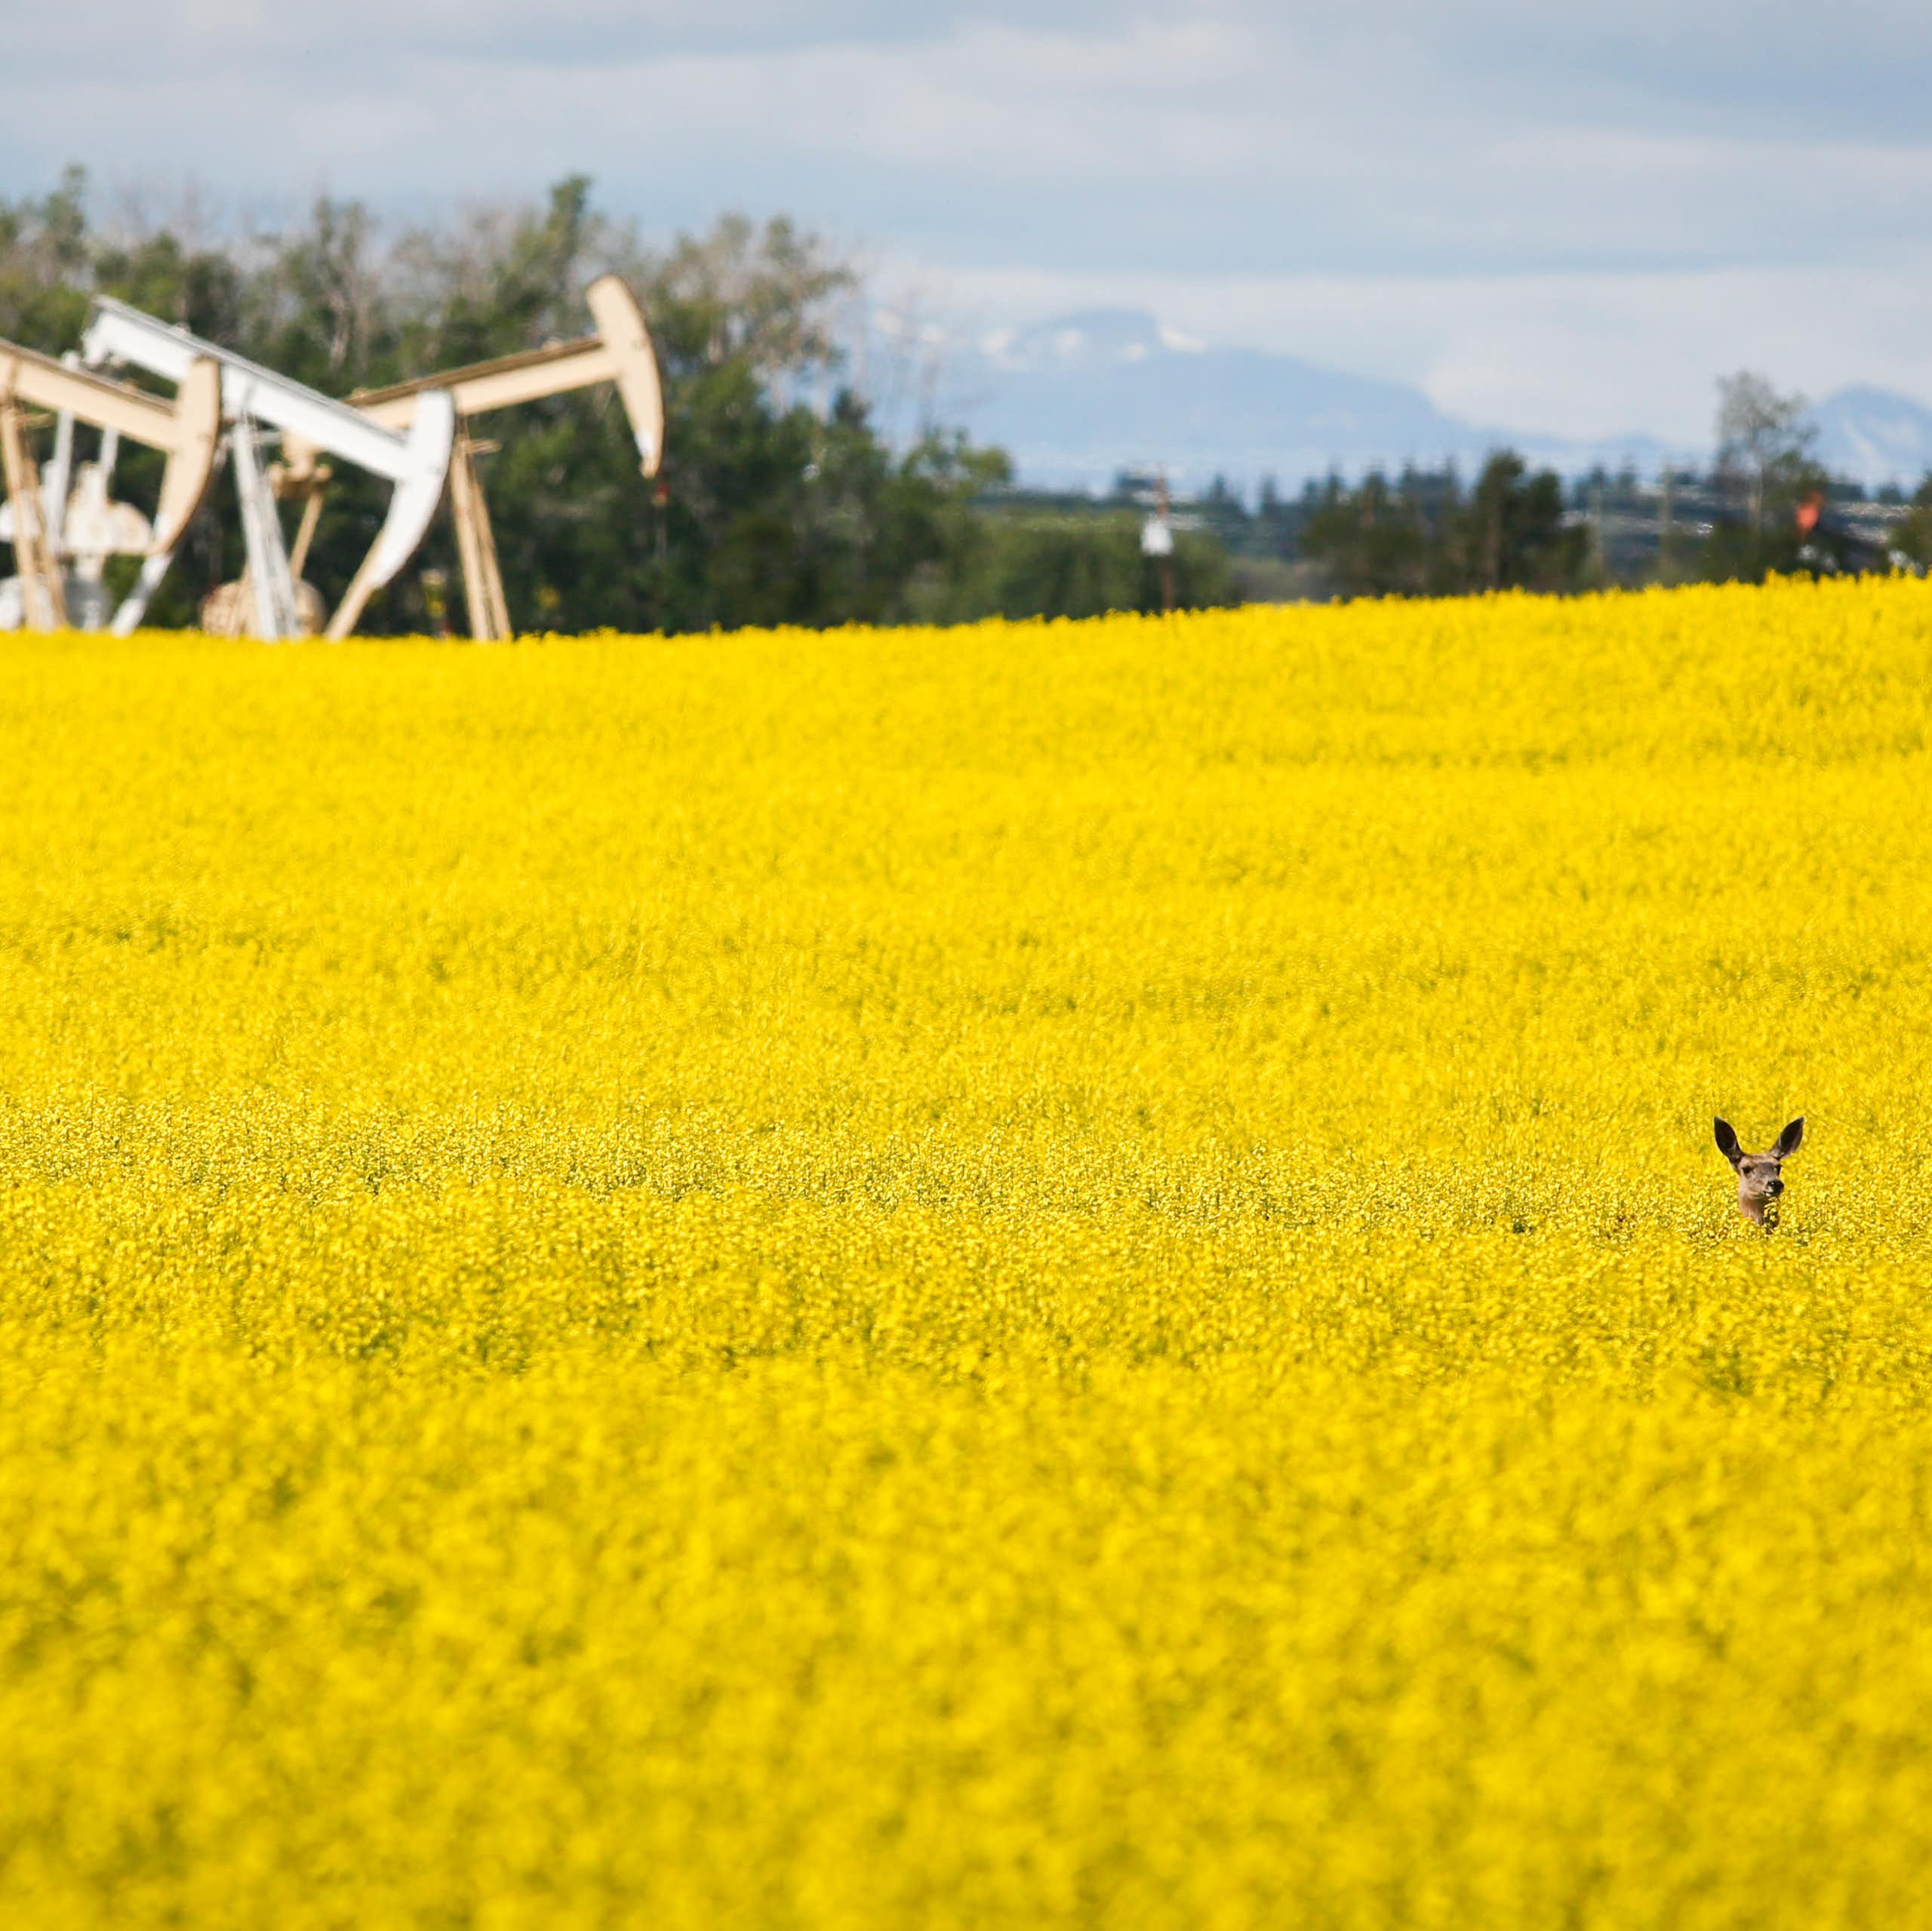 A deer stands in a field in front of oil pumps.